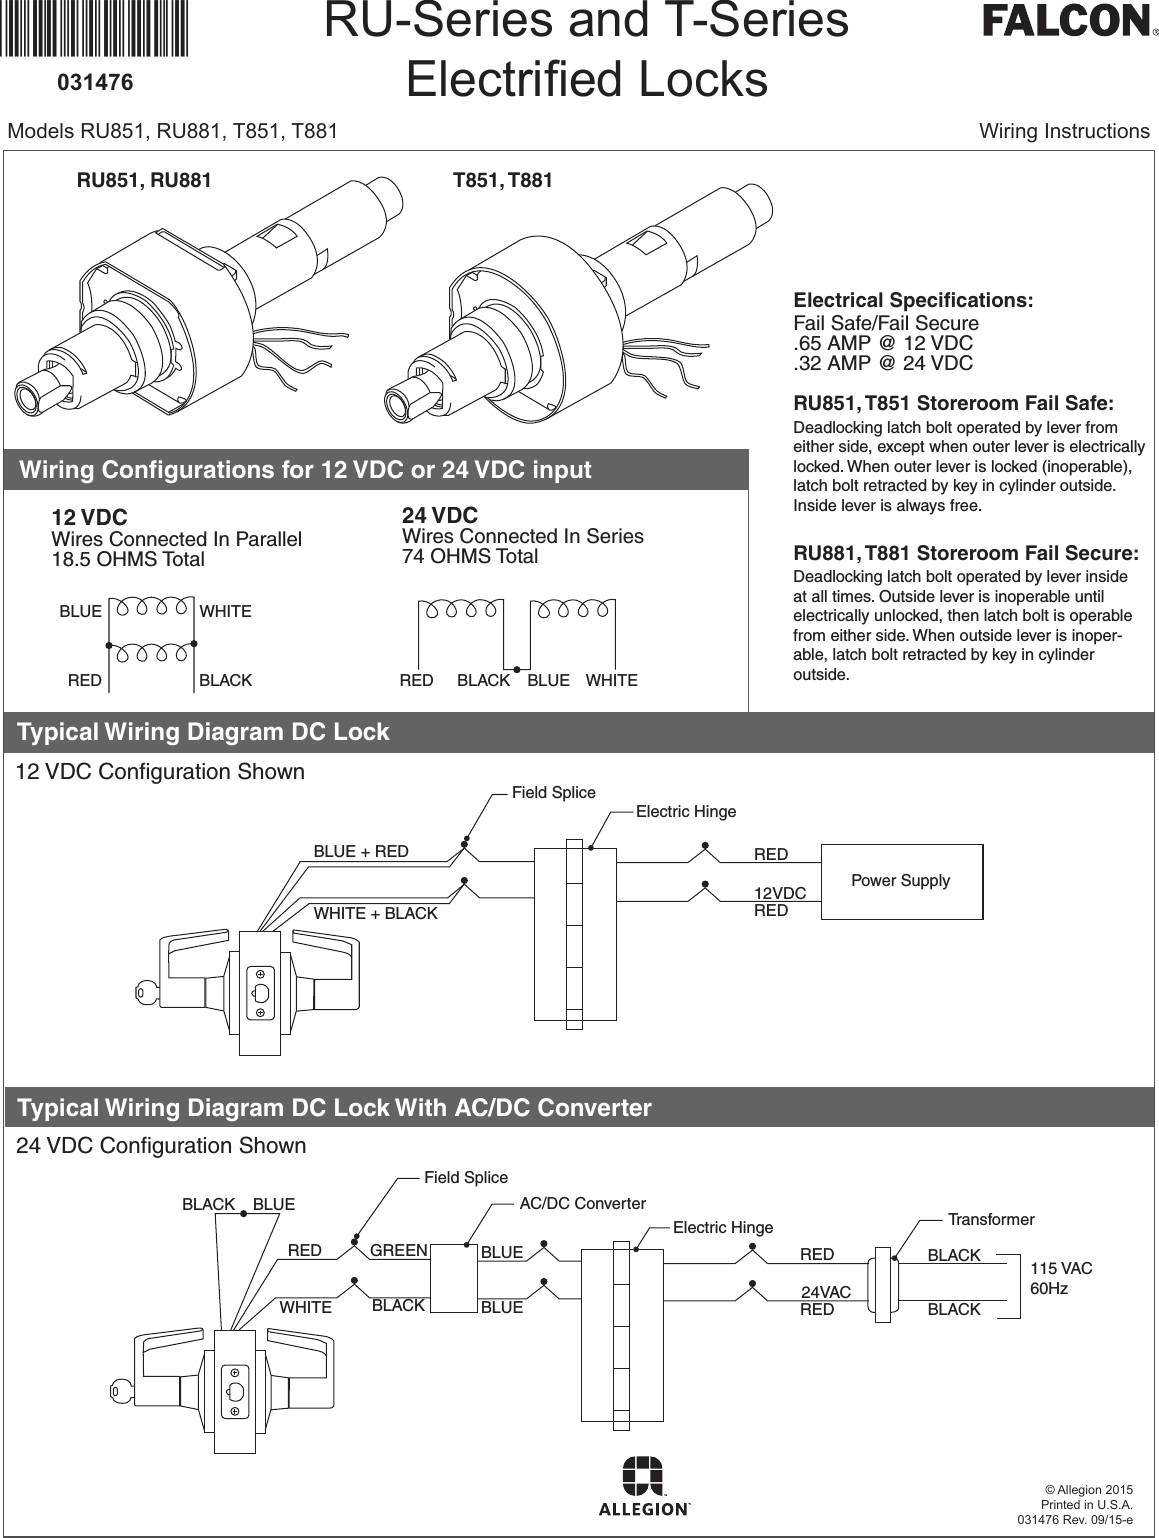 Falcon T Series Installation Instructions Electrical 110164